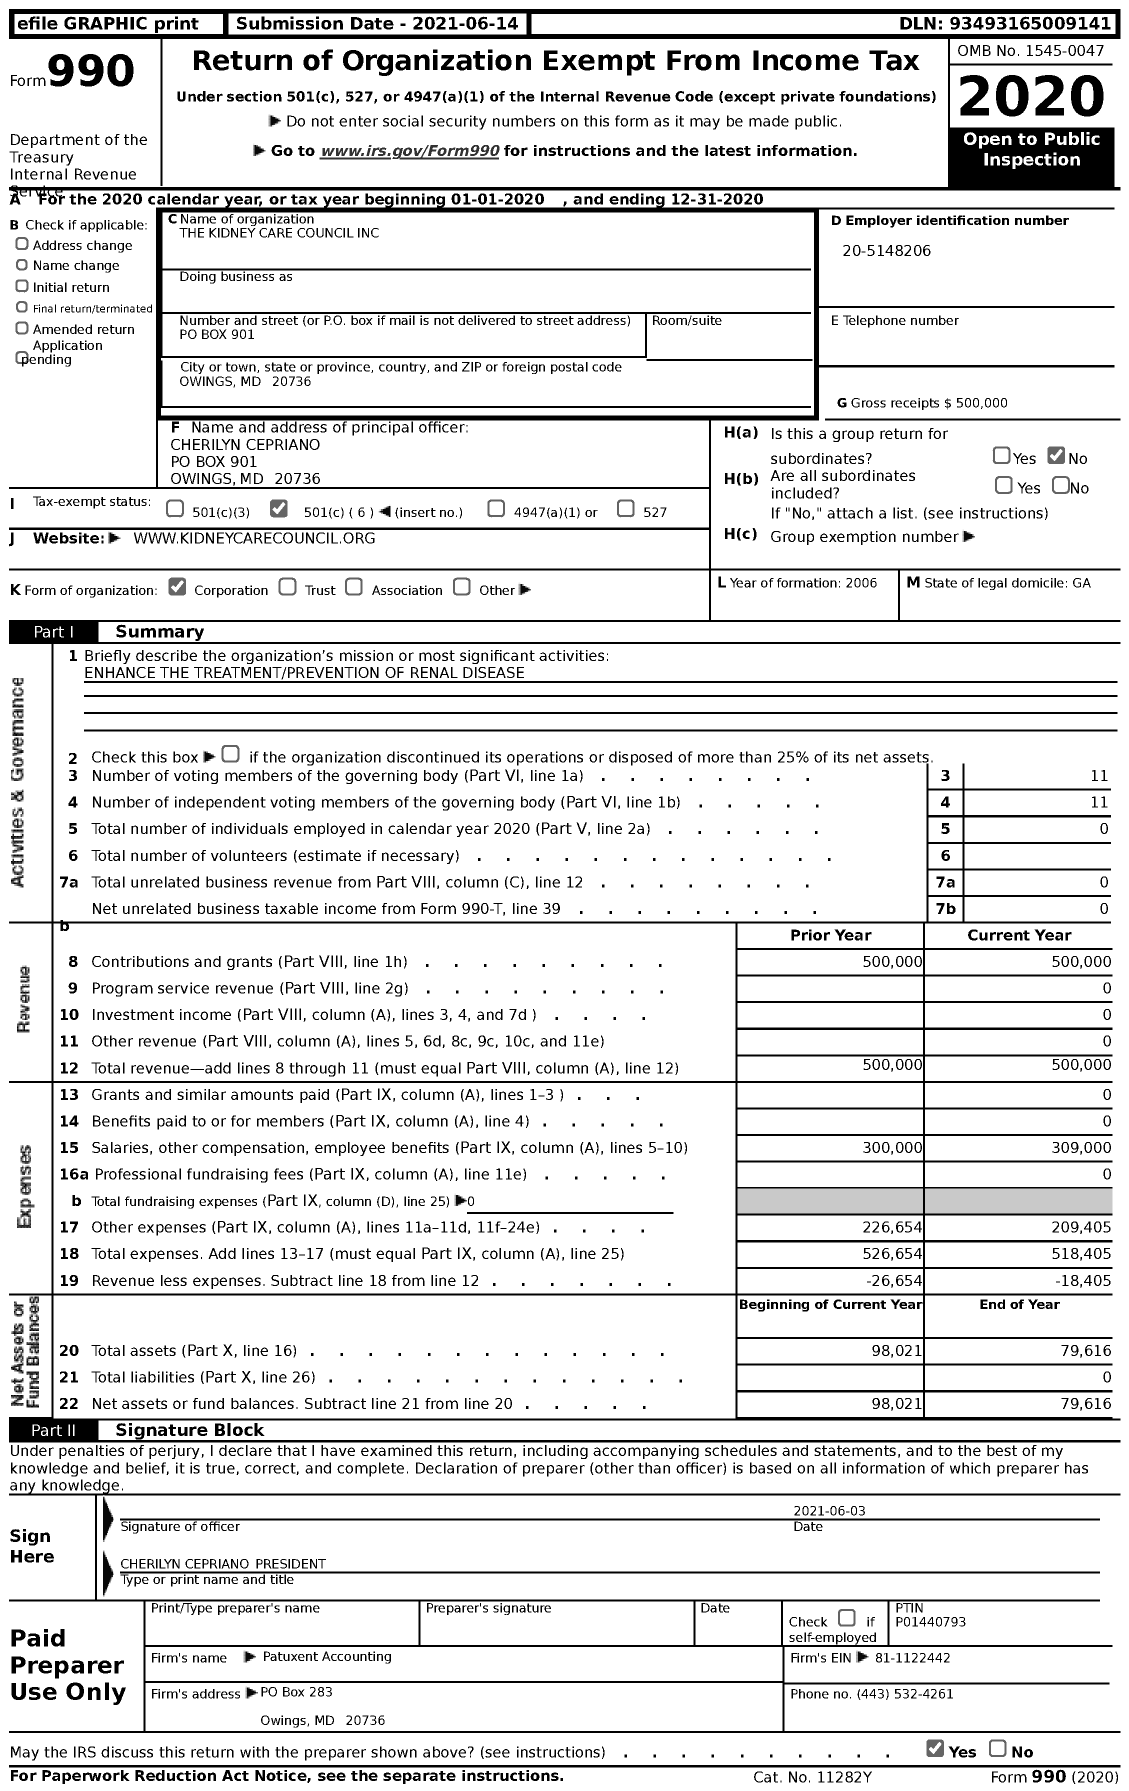 Image of first page of 2020 Form 990 for Kidney Care Council (KCC)